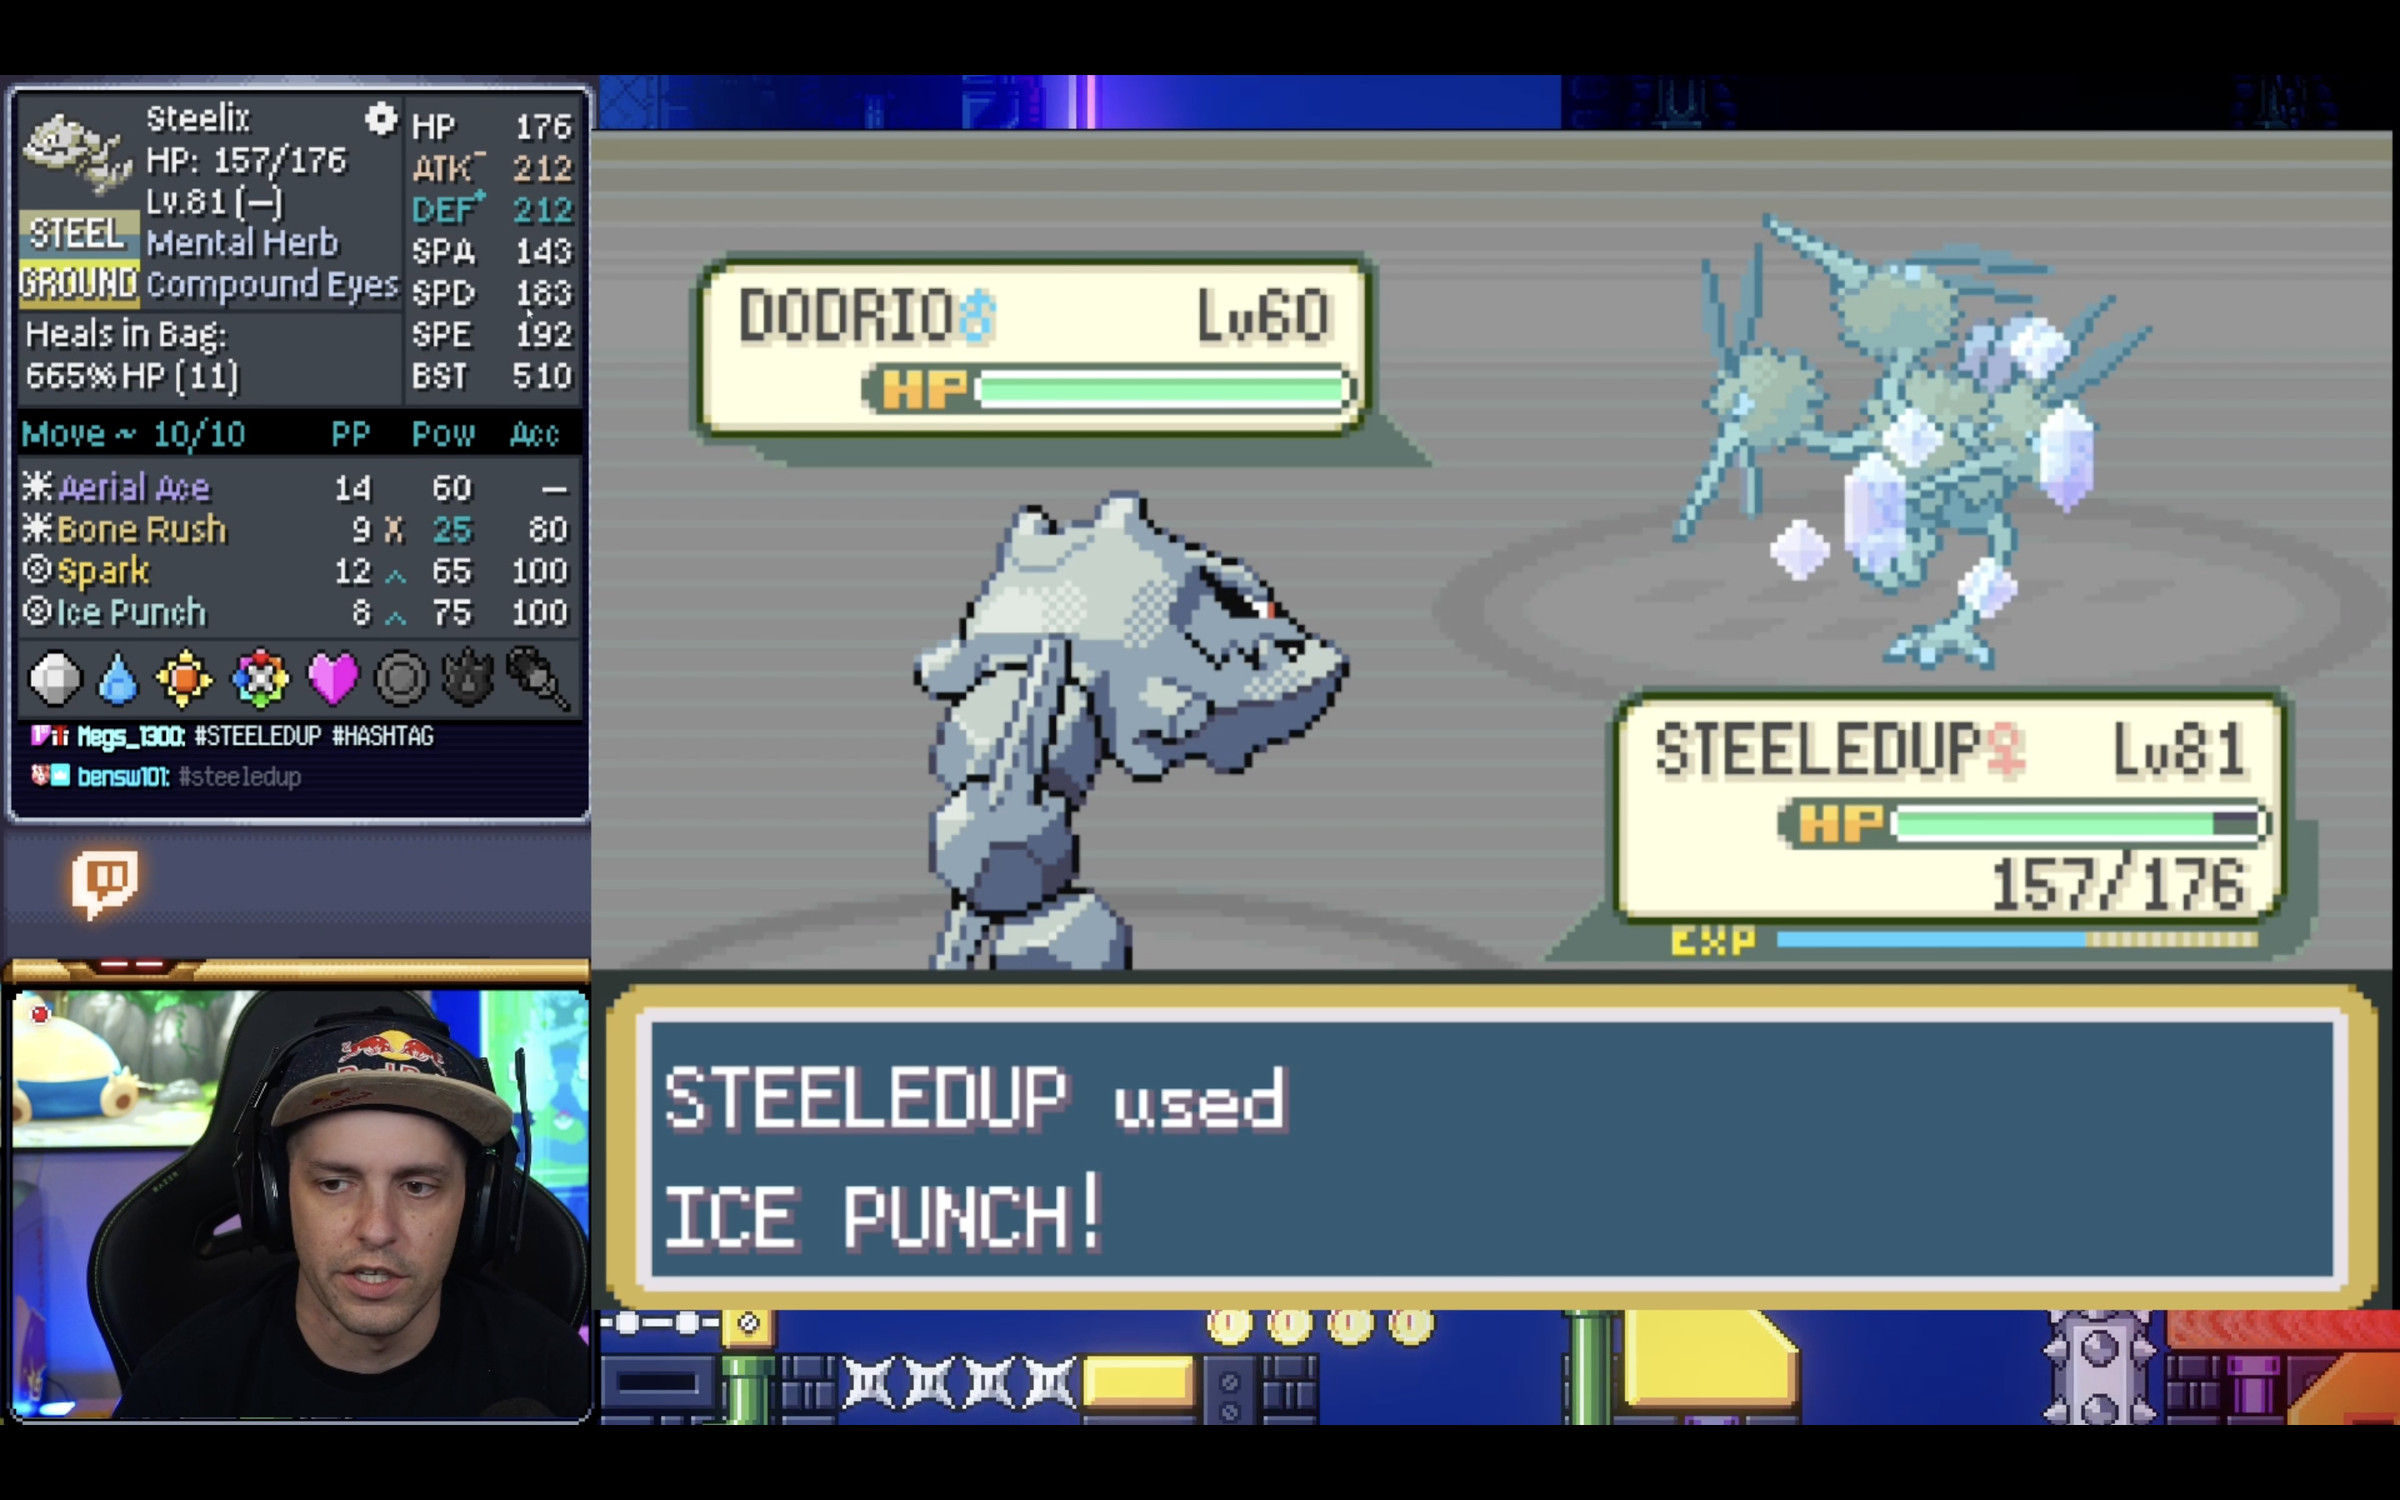 Streamer GrandPooBear’s STEELEDUP looked promising, but it was unfortunately taken out just moments later. RIP STEELEDUP.